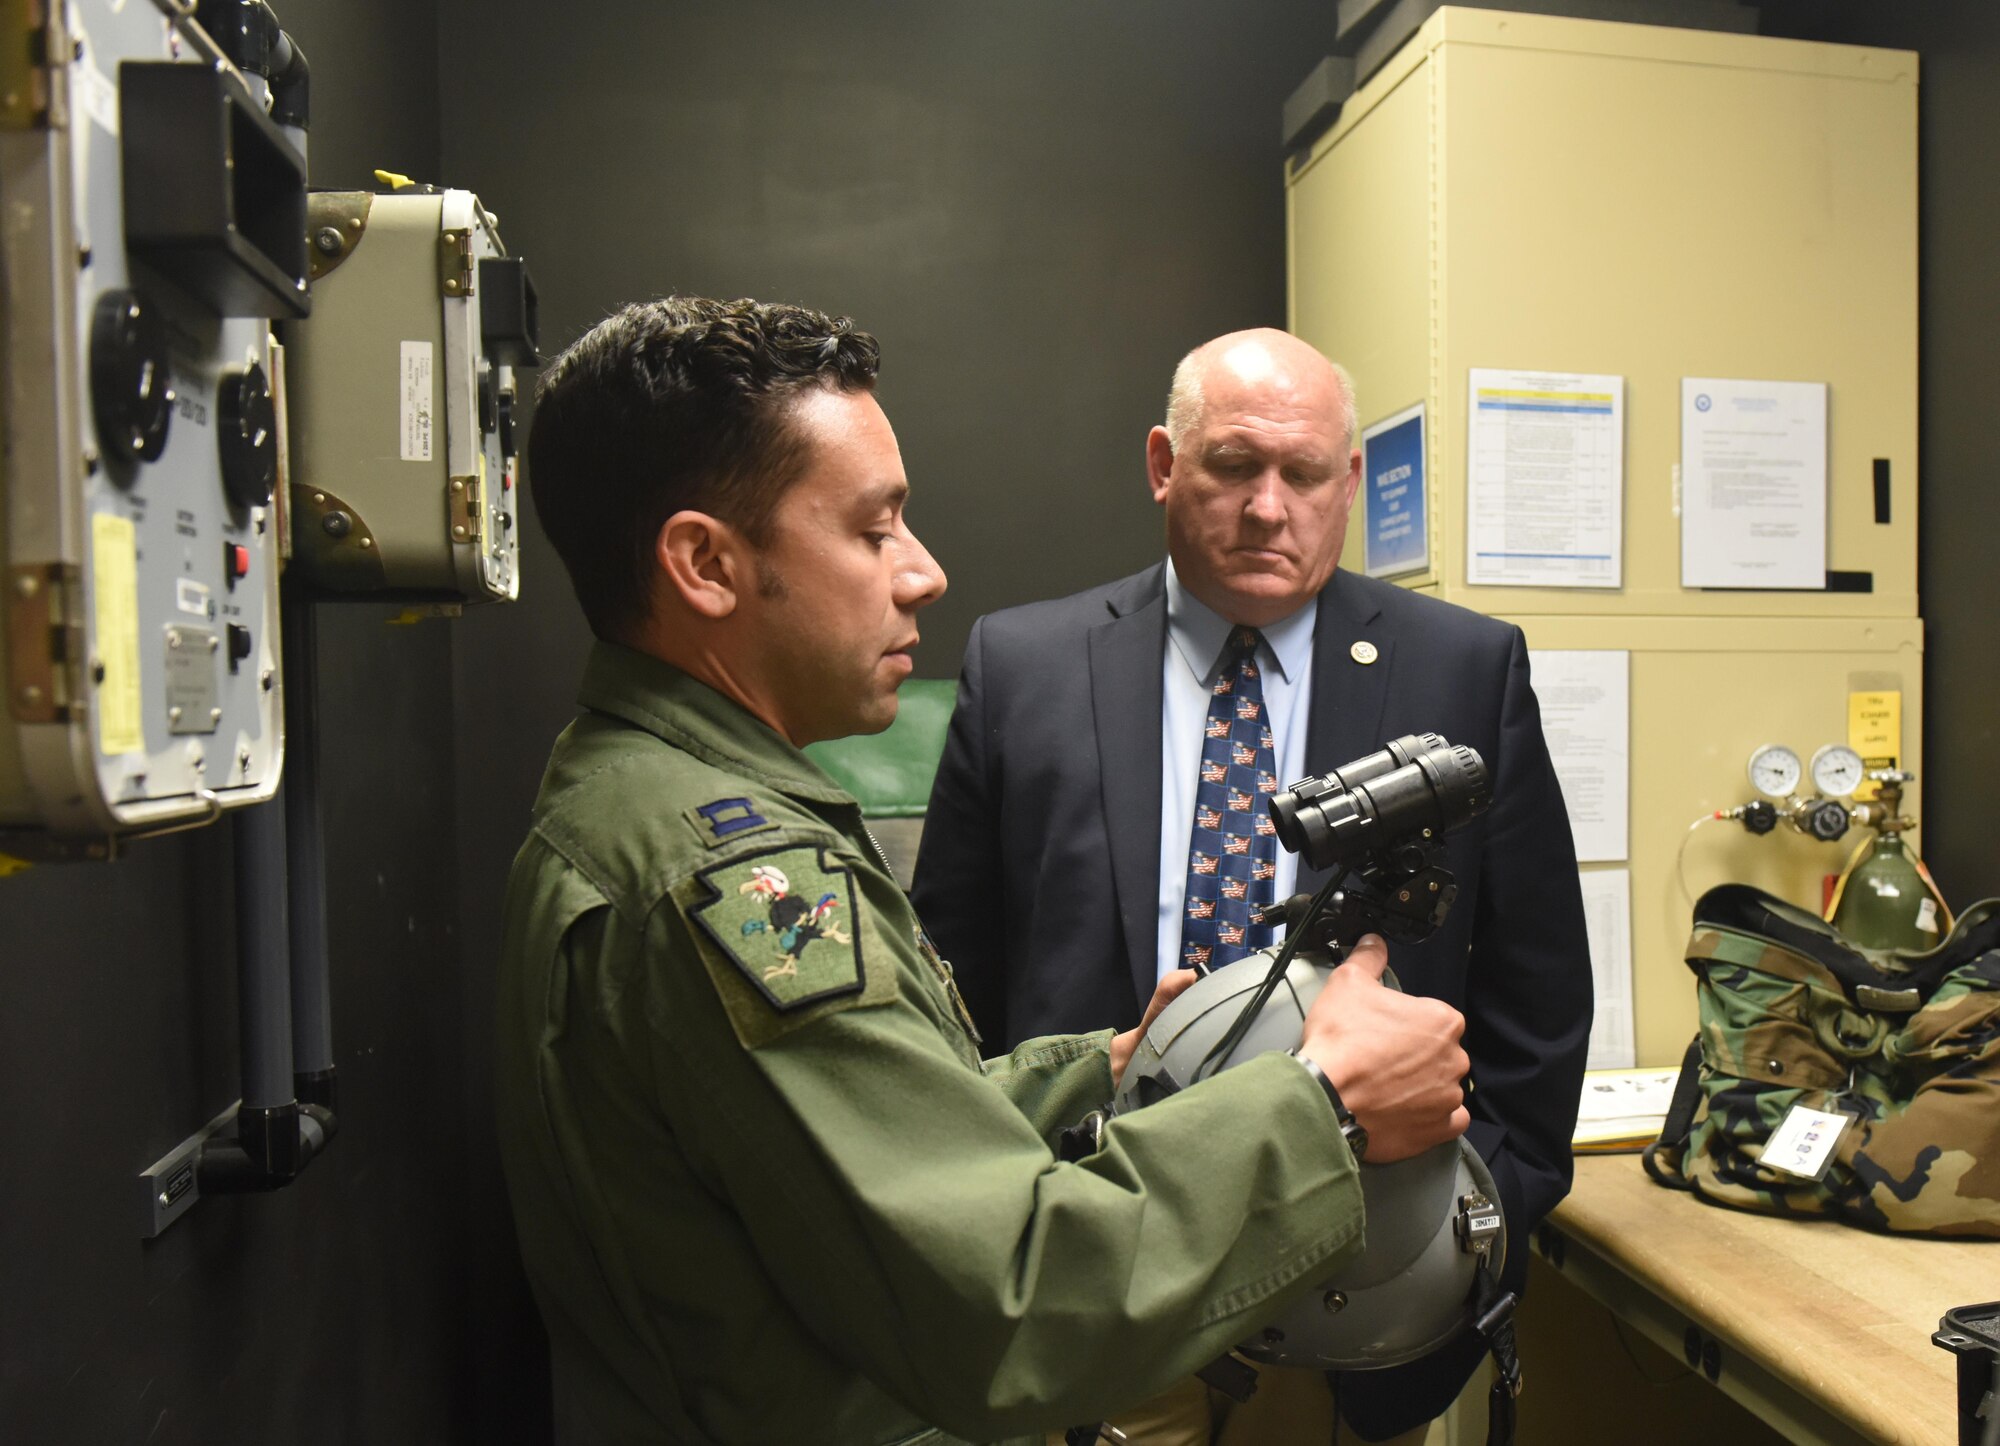 U.S. Rep. Glenn Thompson, R-Pa., toured the 193rd Special Operations Wing, Middletown, Pennsylvania, May 20. Capt. Eric Barnett, a pilot with the 193rd SOW, explains the benefits and drawbacks of the night vision goggles. He also reviewed how to assemble them and shared other flight equipment information. Thompson then got to test out the specialized goggles. (U.S. Air National Guard photo by Senior Airman Julia Sorber/Released)